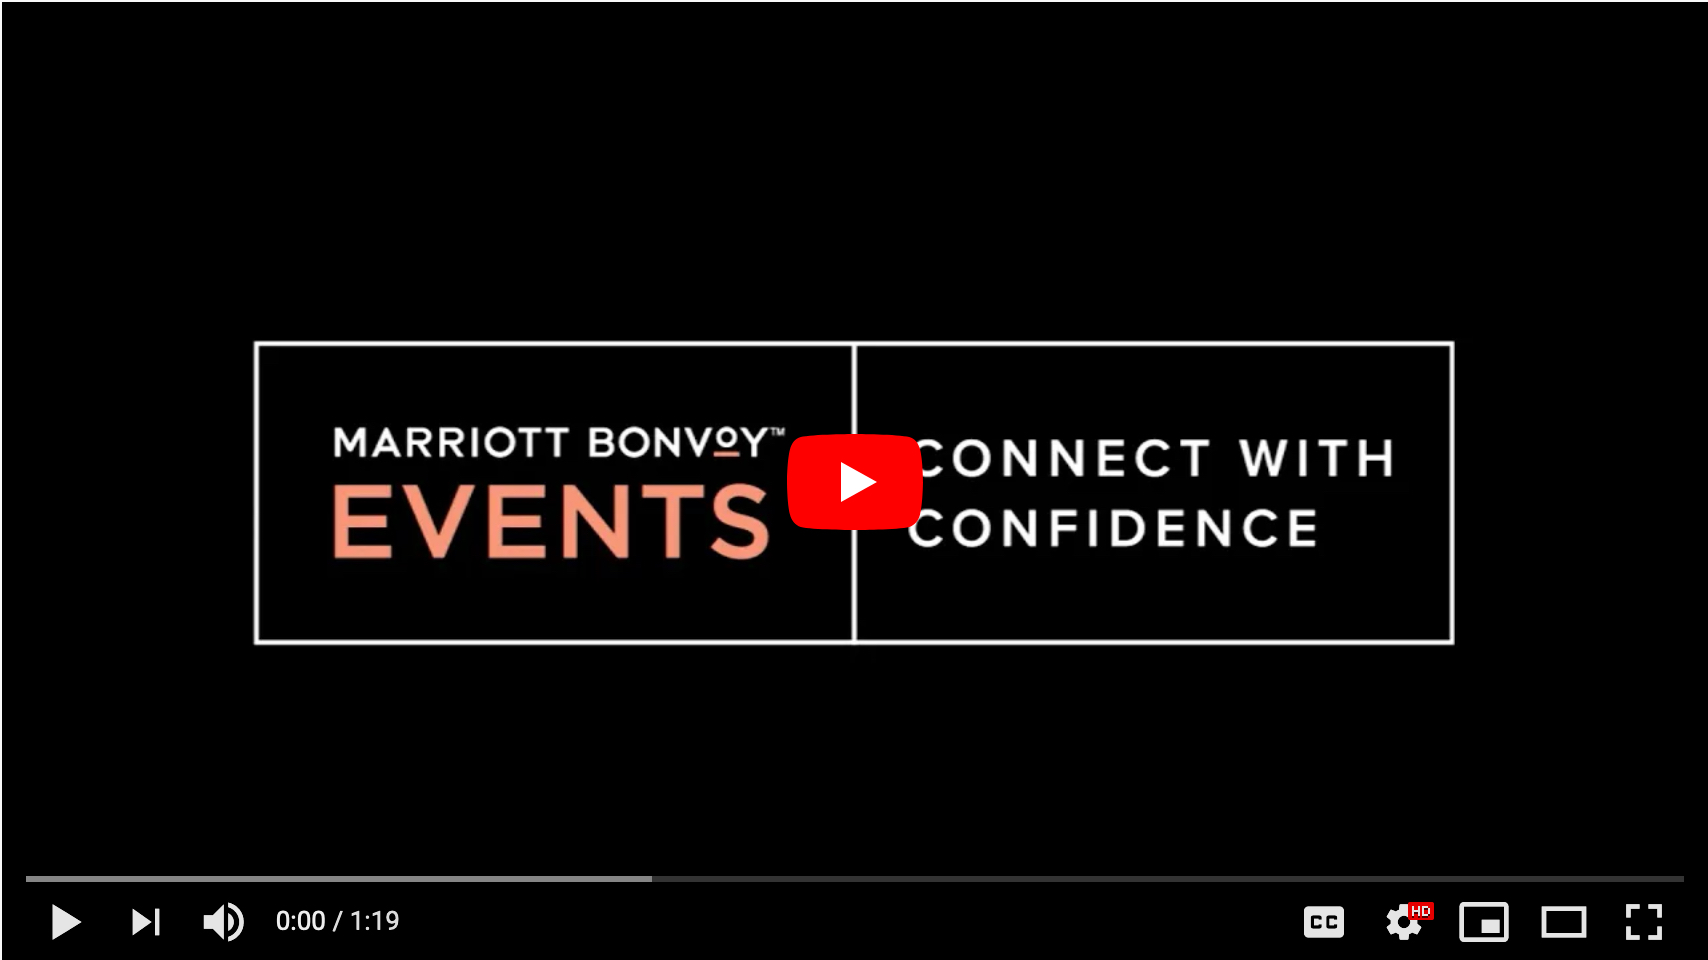 Marriott Connect with Confidence